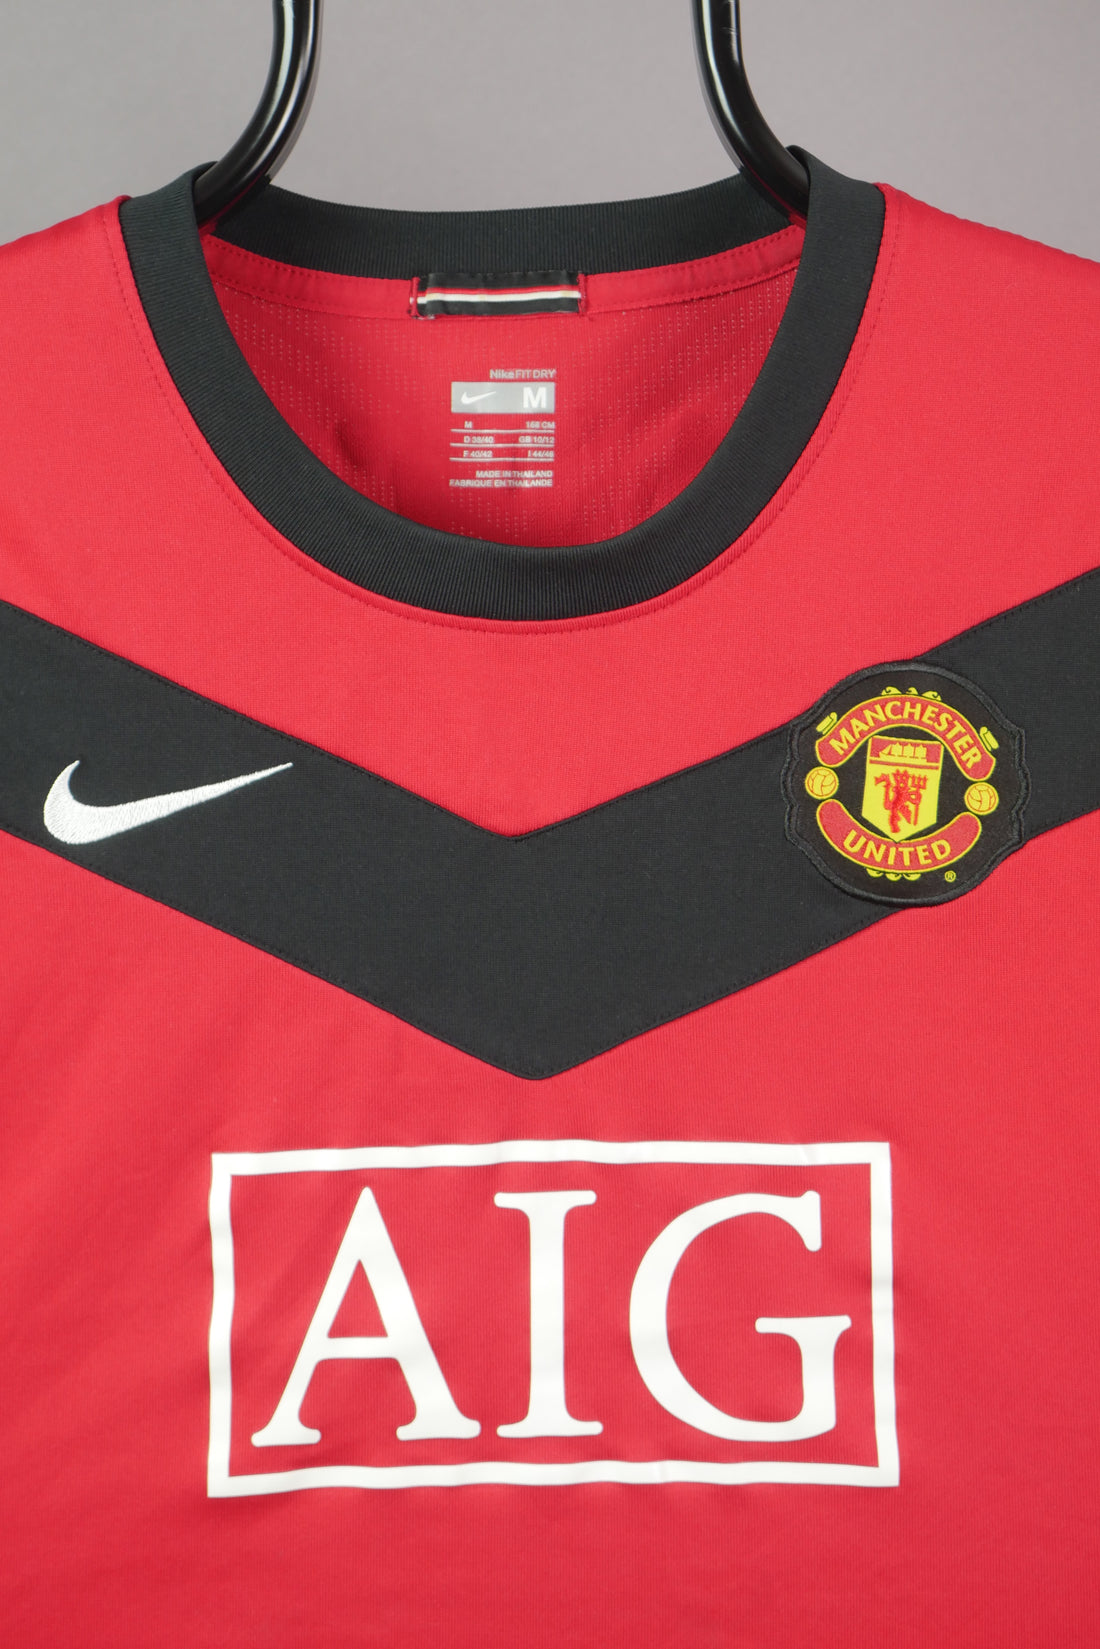 The Nike Manchester United Football T-Shirt (M)